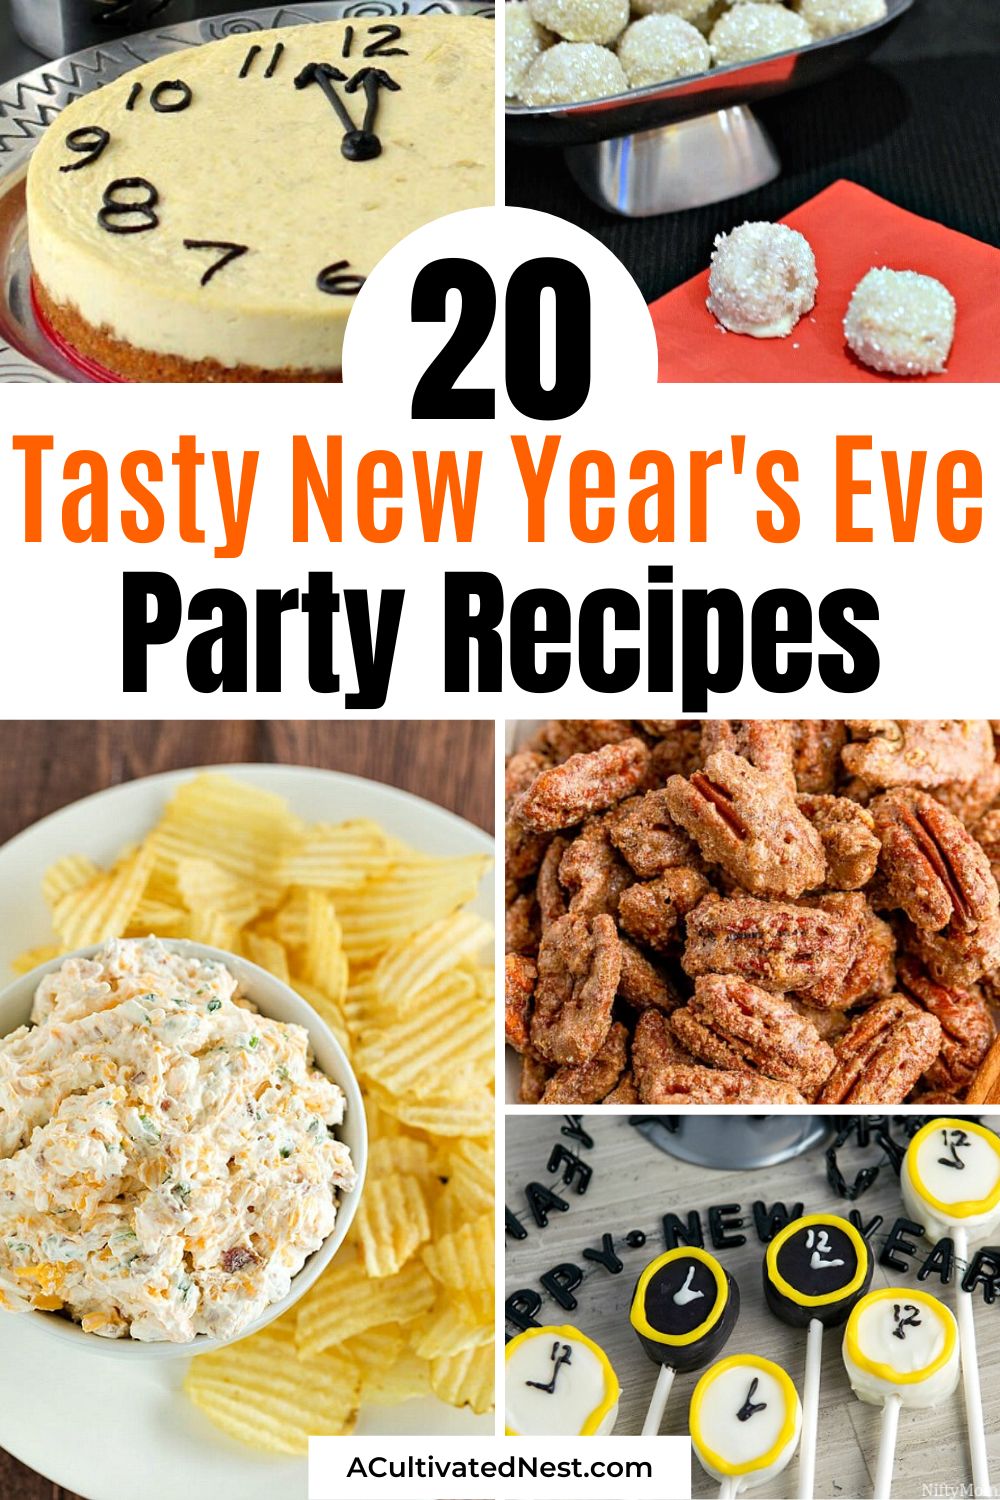 20 New Year's Eve Party Food Ideas- If you want a delicious way to bring in the New Year, check out the New Year's Eve party food ideas! You and your guests will love these recipes! #NewYearsEveRecipes #recipes #appetizers #partyAppetizers #ACultivatedNest